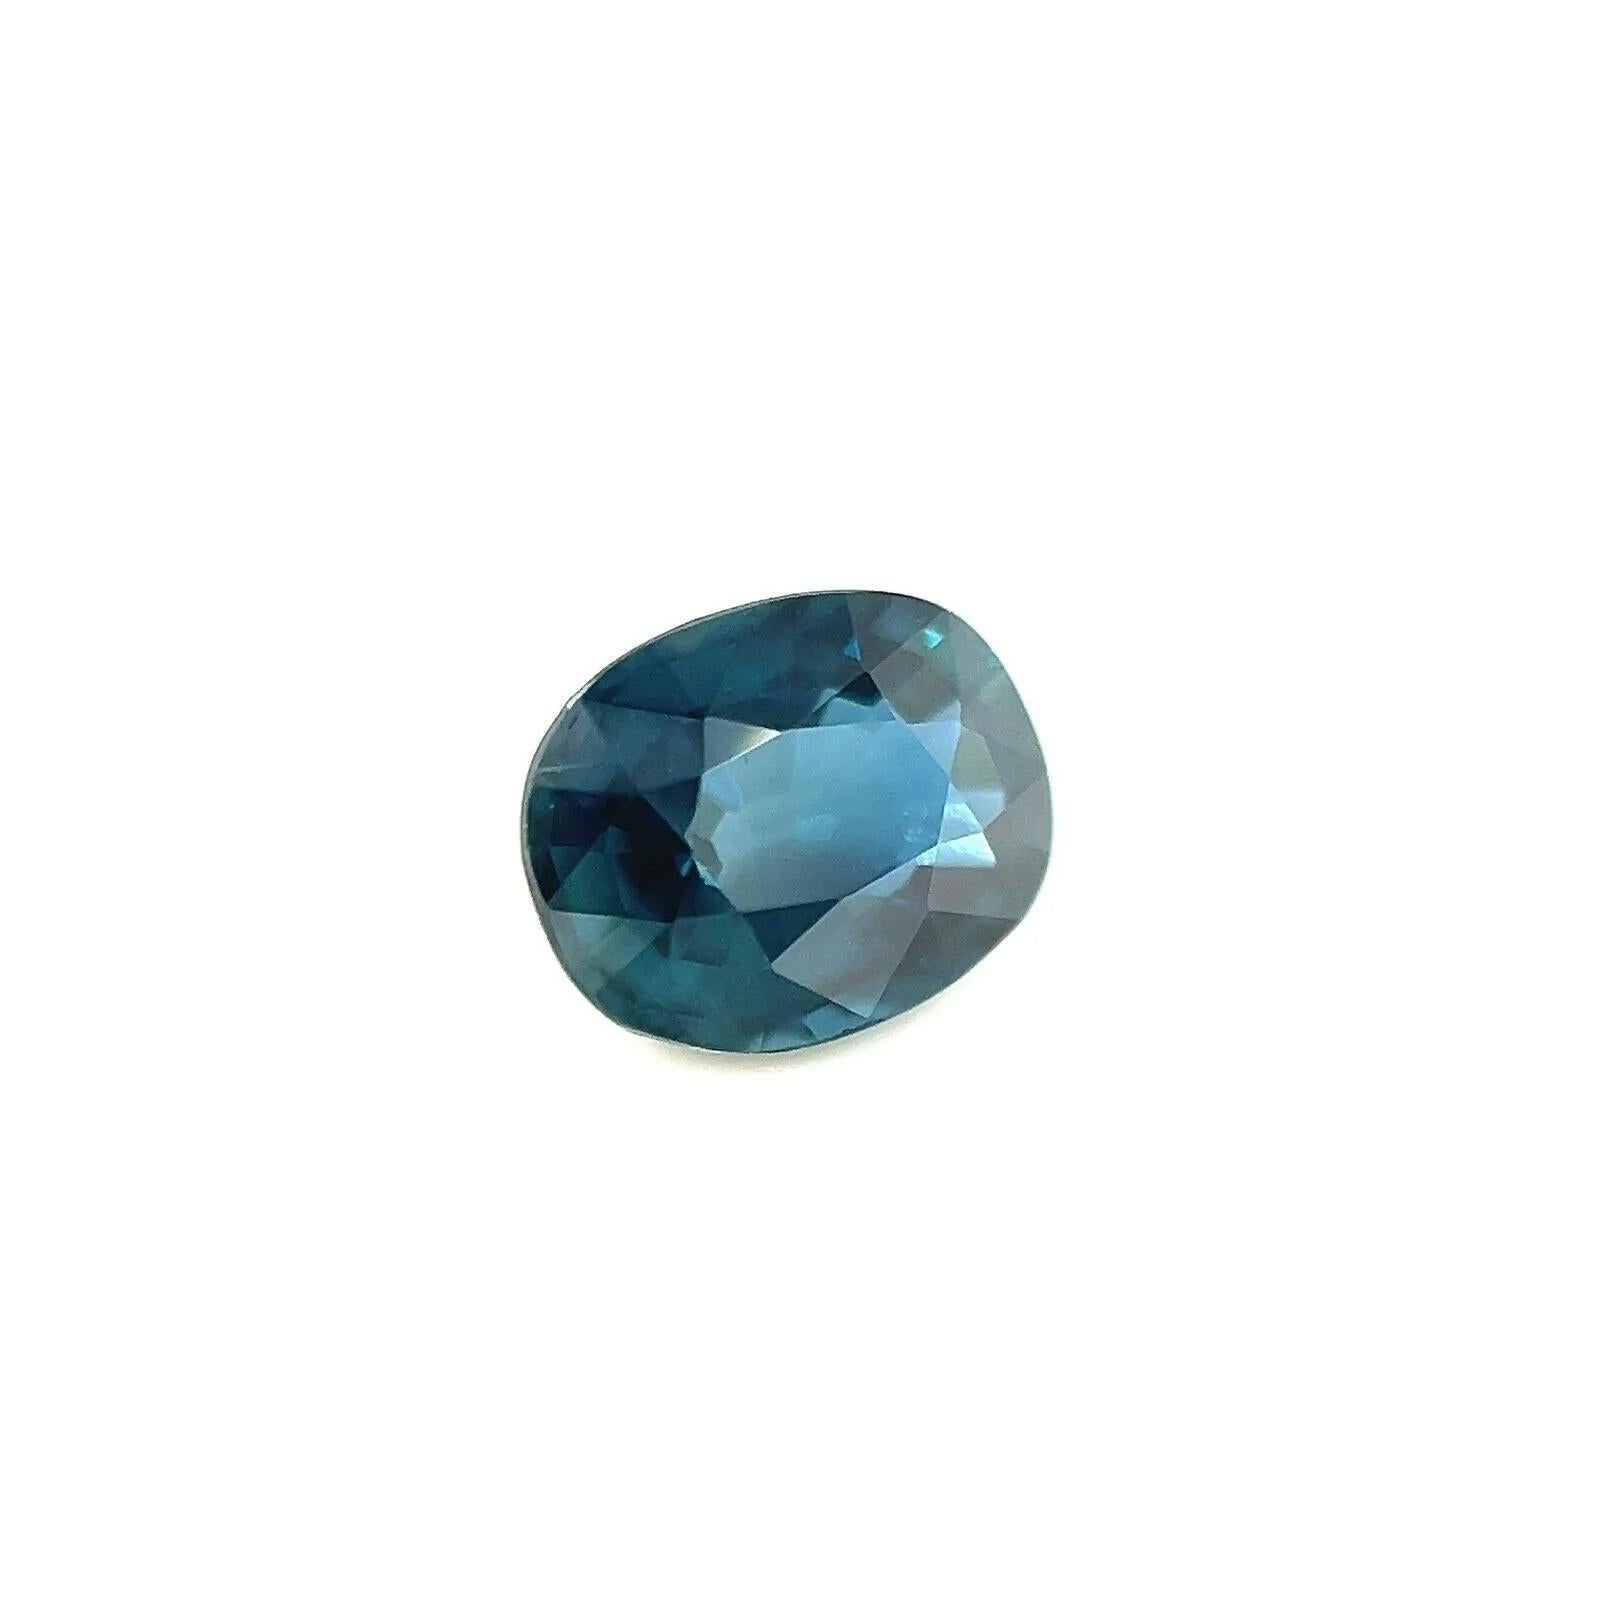 Indigo Blue Sapphire 0.75ct Natural Australian Cushion Cut Loose Gem 5.8x4.5mm

Natural Australian Blue Sapphire Gemstone.
0.75 Carat with a deep blue colour and excellent clarity, practically flawless. Also has an excellent cushion cut measuring